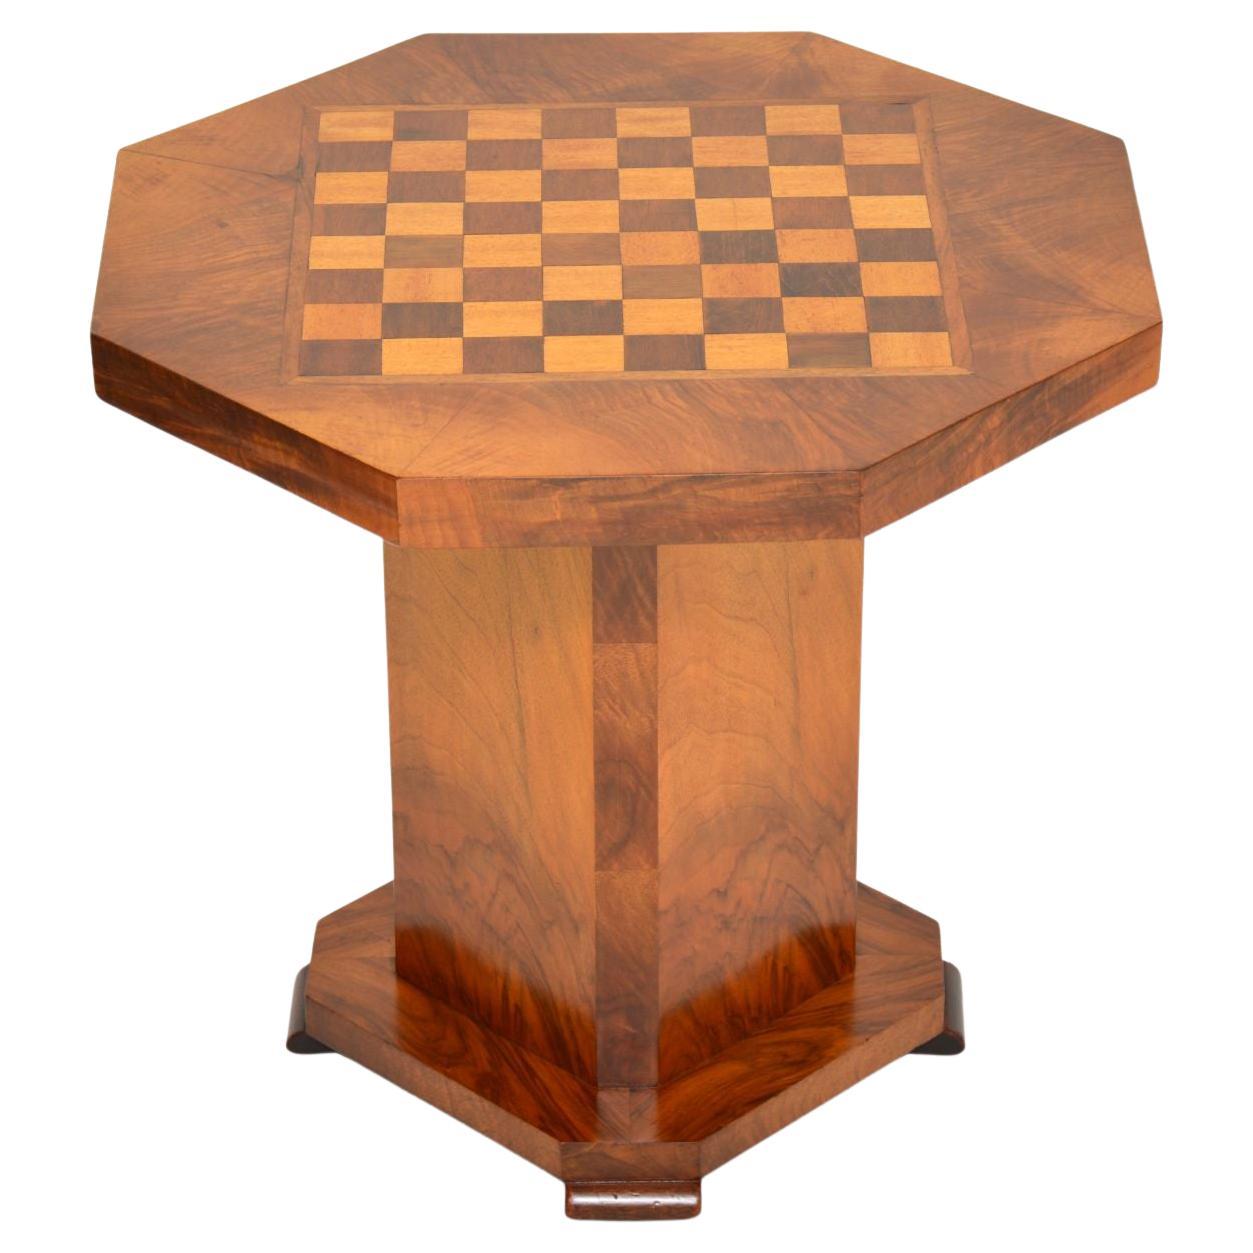 1930's Vintage Art Deco Chess / Coffee Table